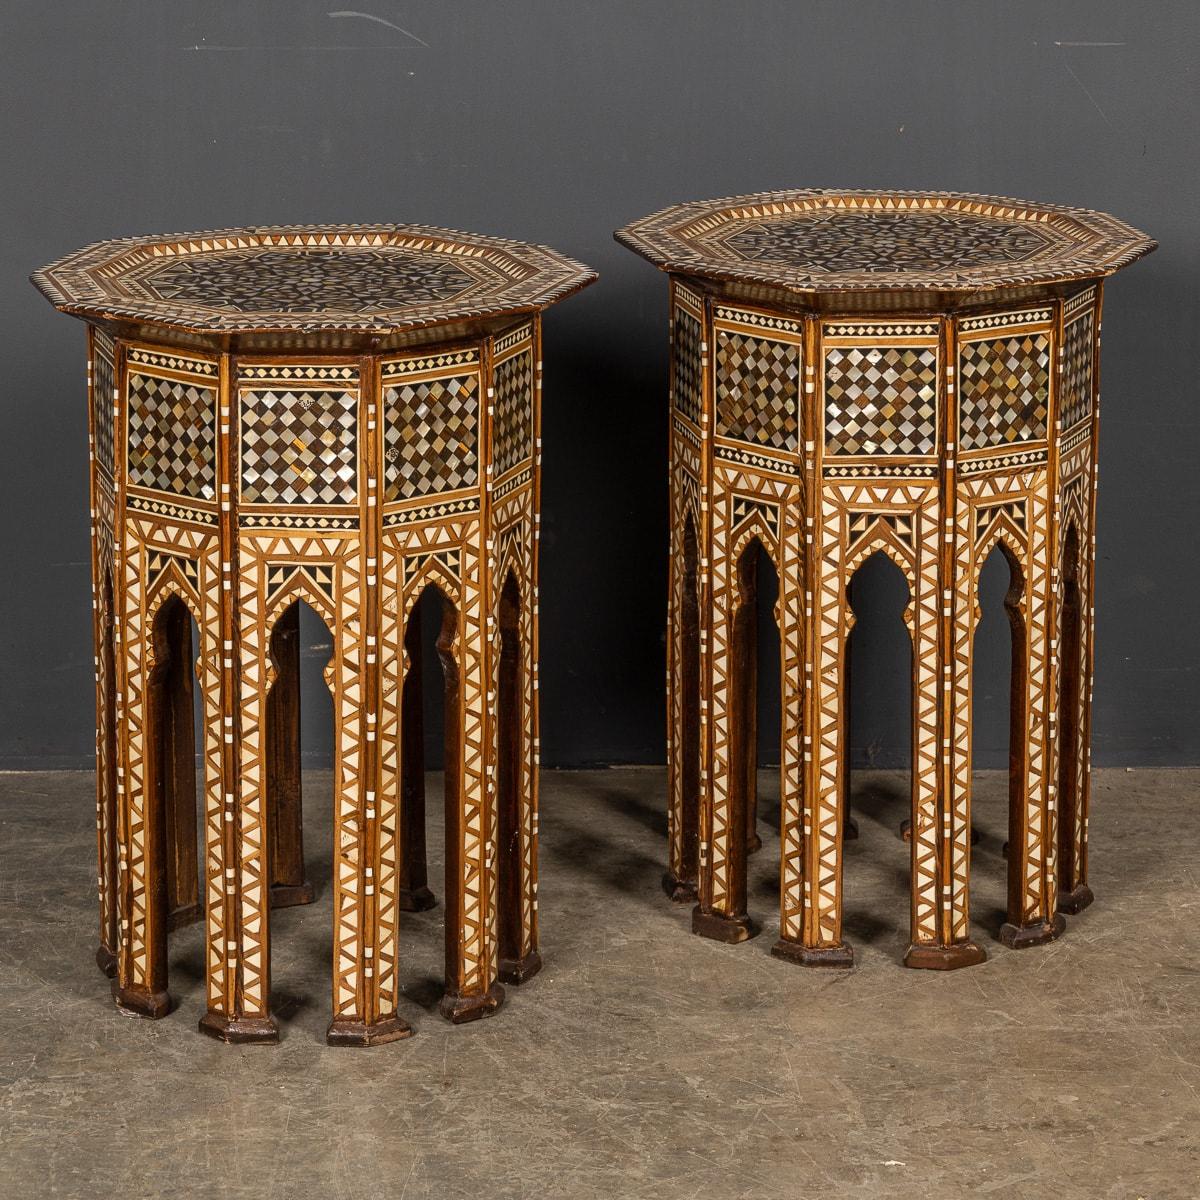 A pair of early 20th Century levantine inlaid tables from the 1930's. Handmade in hard wood with intricate inlaid moorish patterns of mother of pearl and camel bone. A rich patina of age adds to the beauty of this pair.

CONDITION
In Good Condition